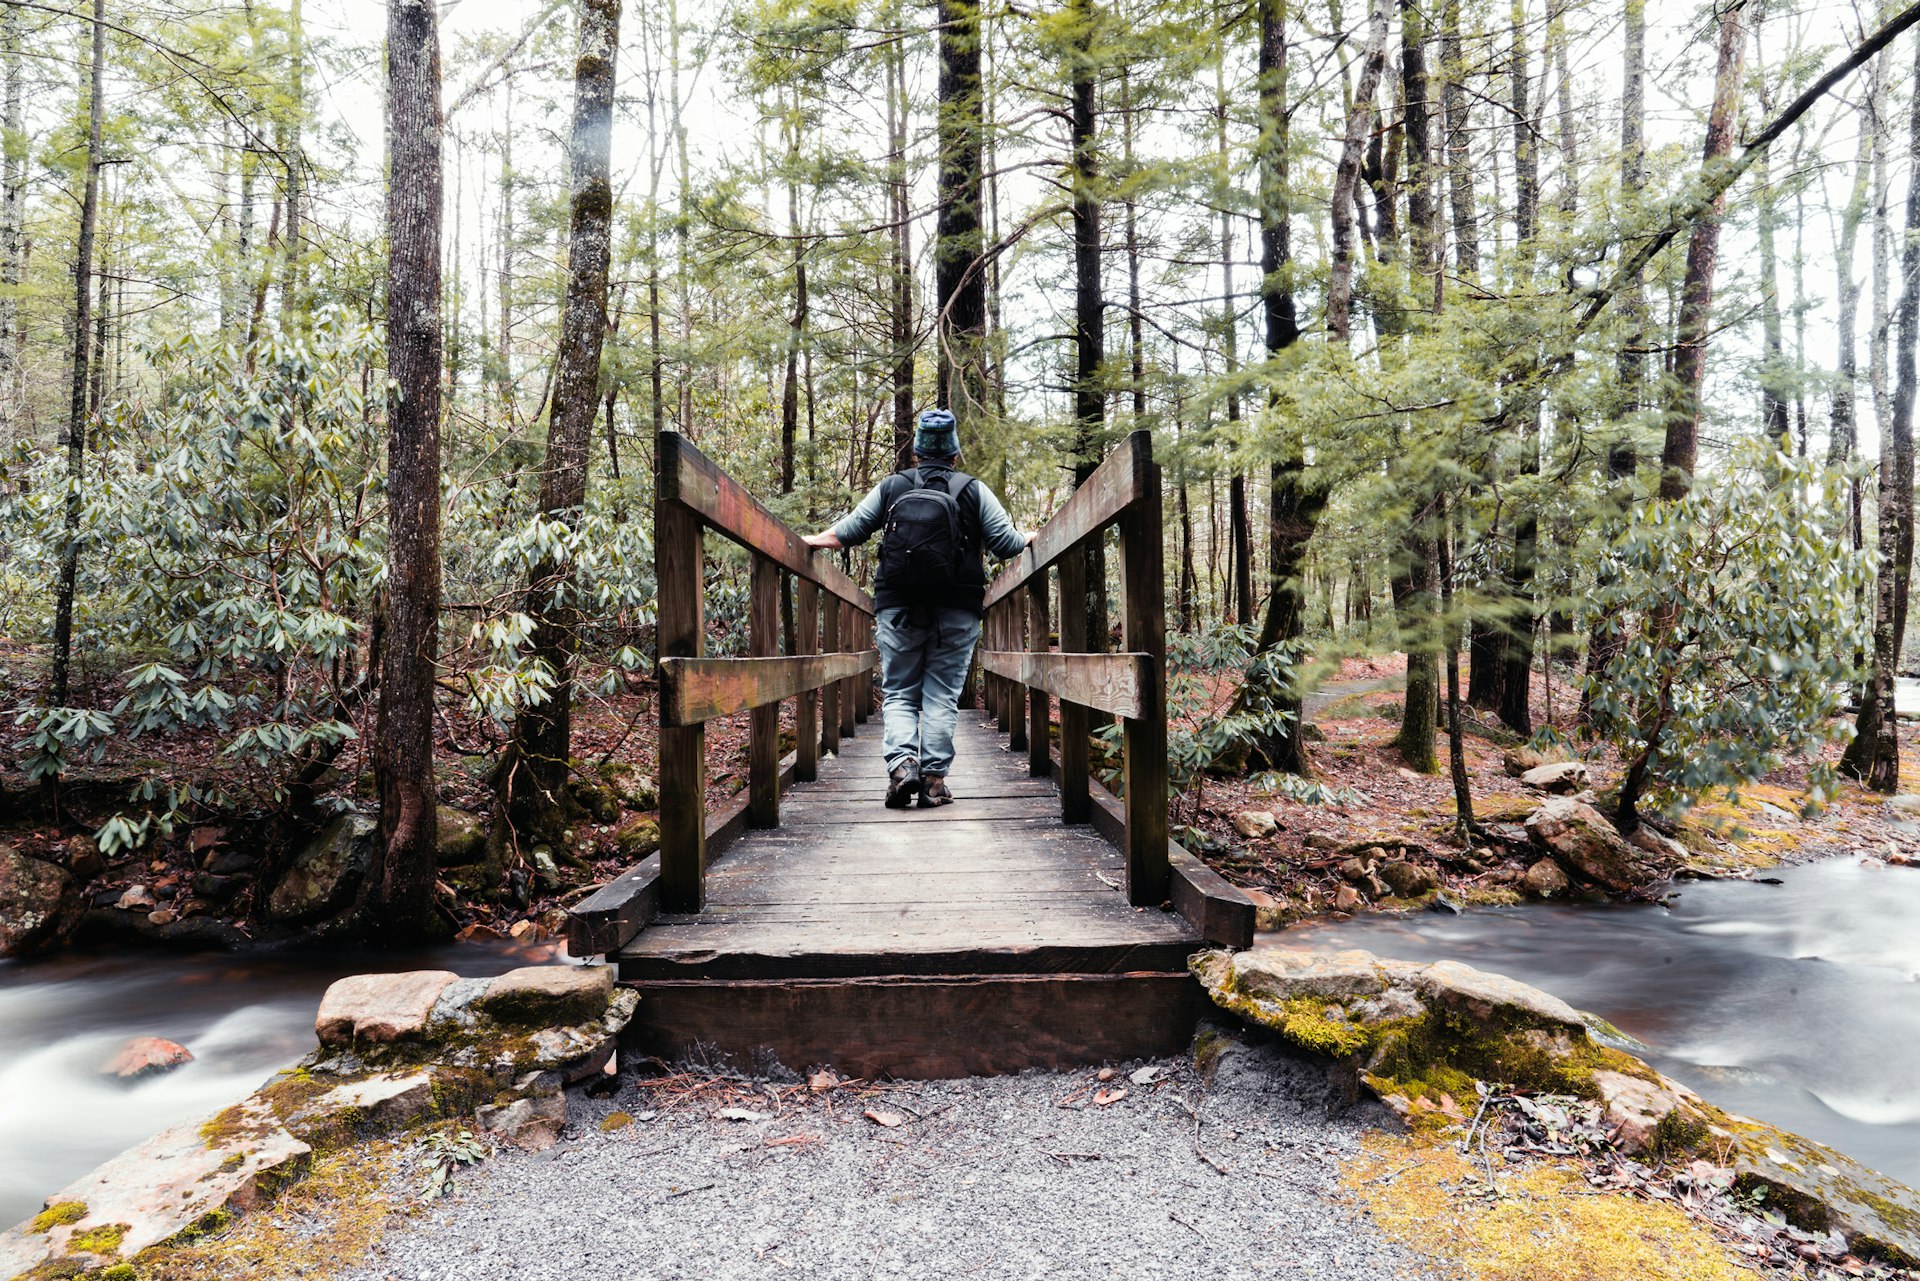 A hiker stands on a wooden bridge surrounded by forest